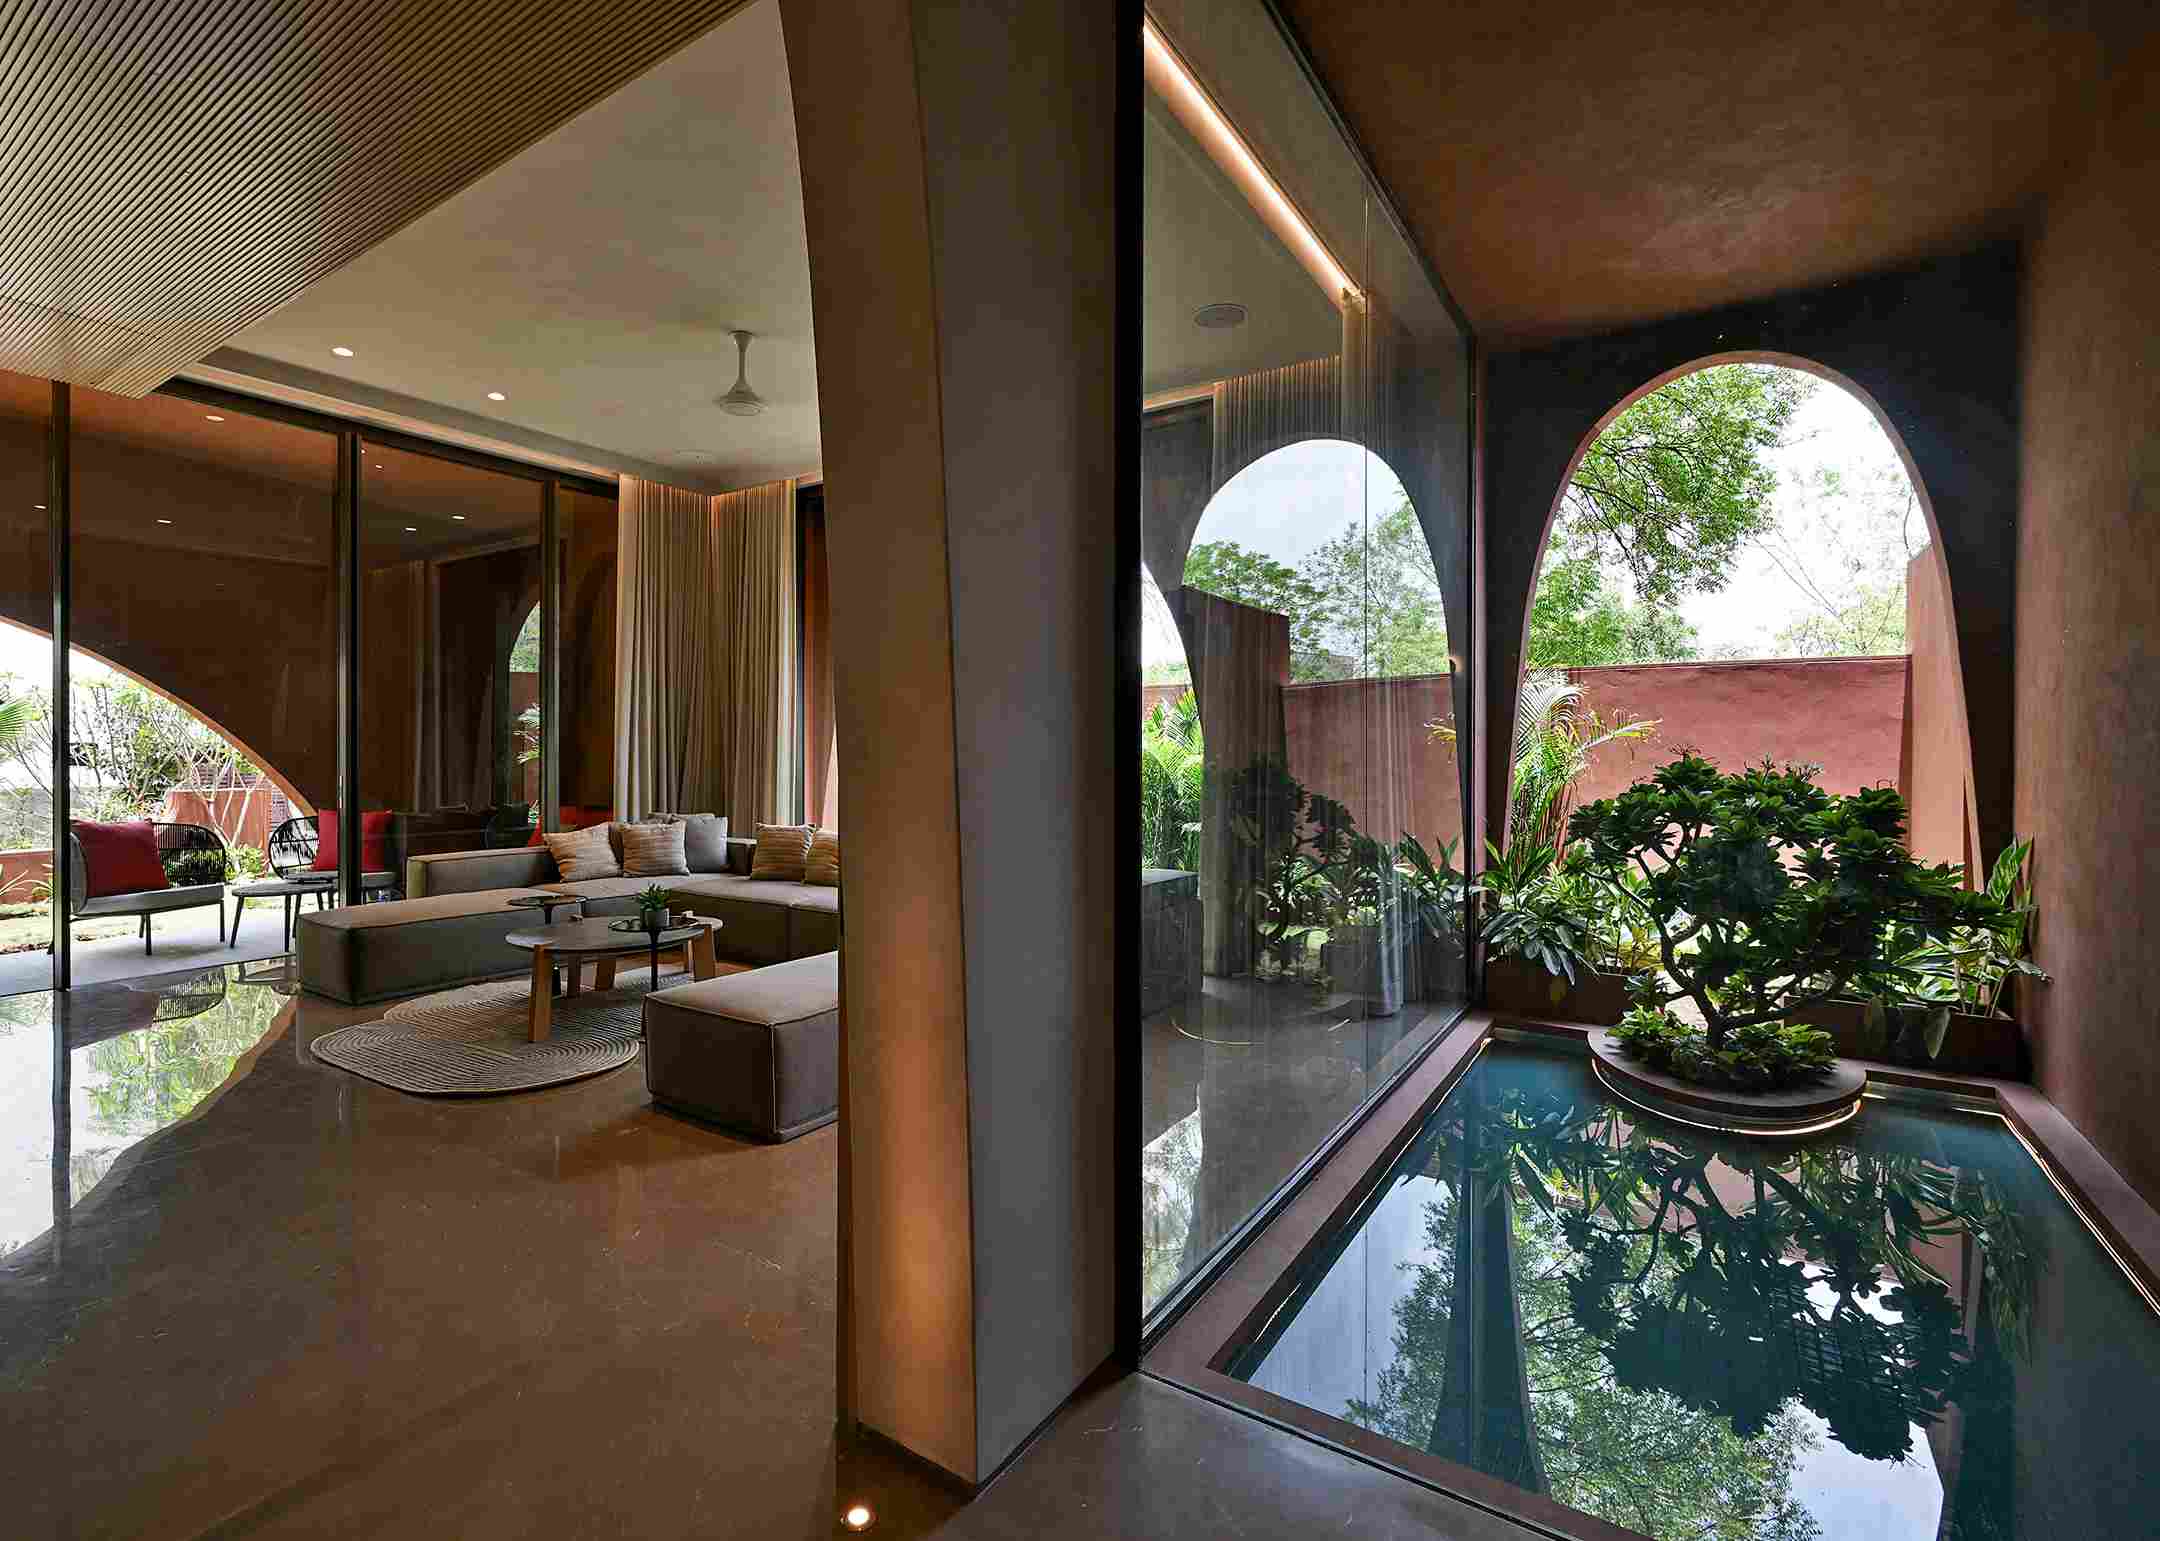 A central corridor runs through the house from east to west ending in a pool of water